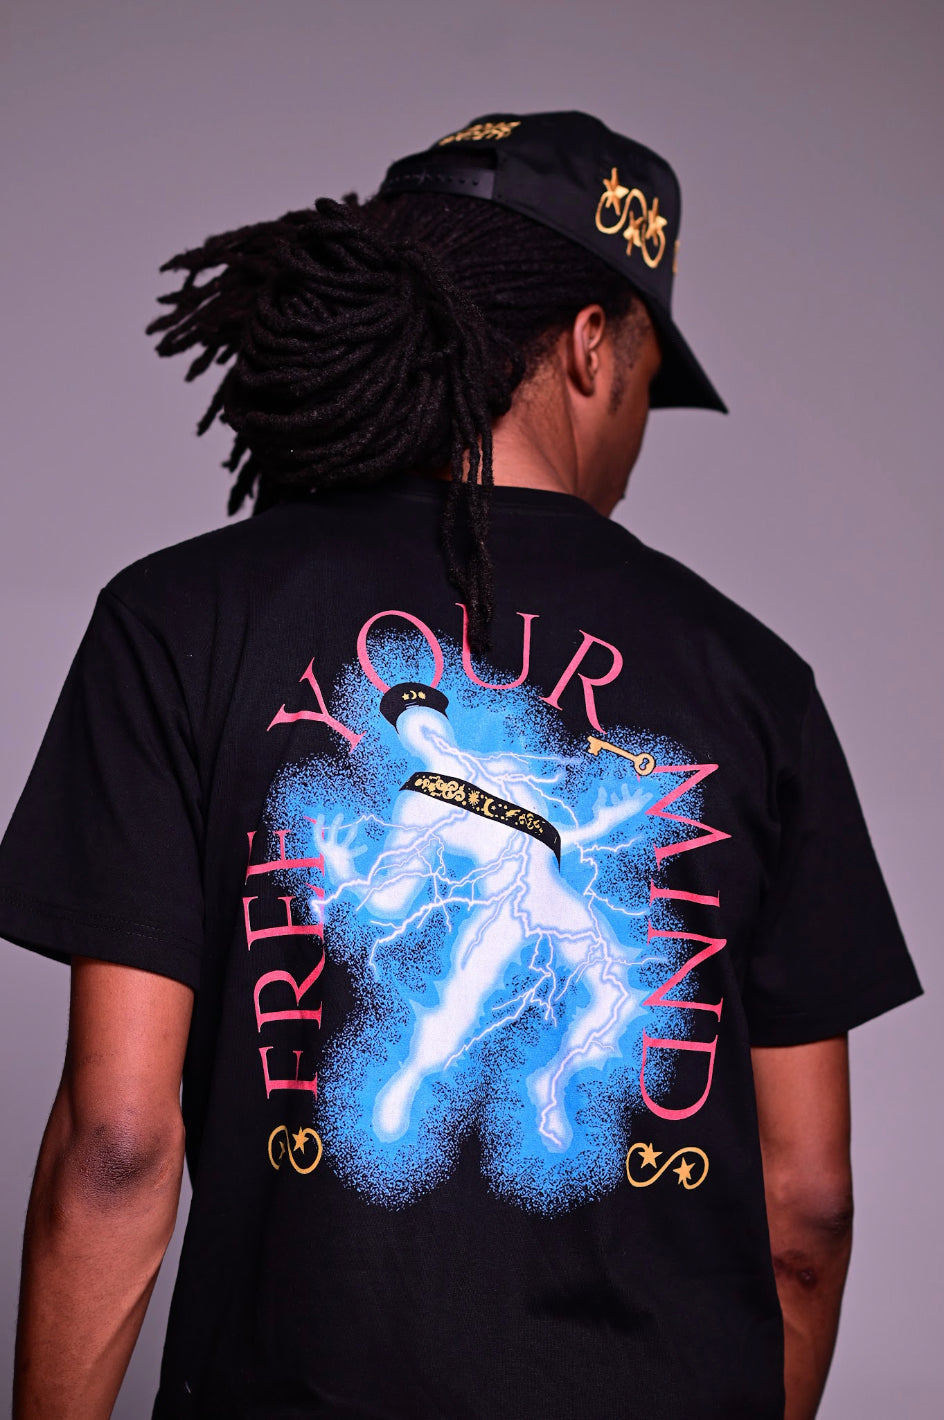 Crownz Society “Free your Mind” T-Shirt